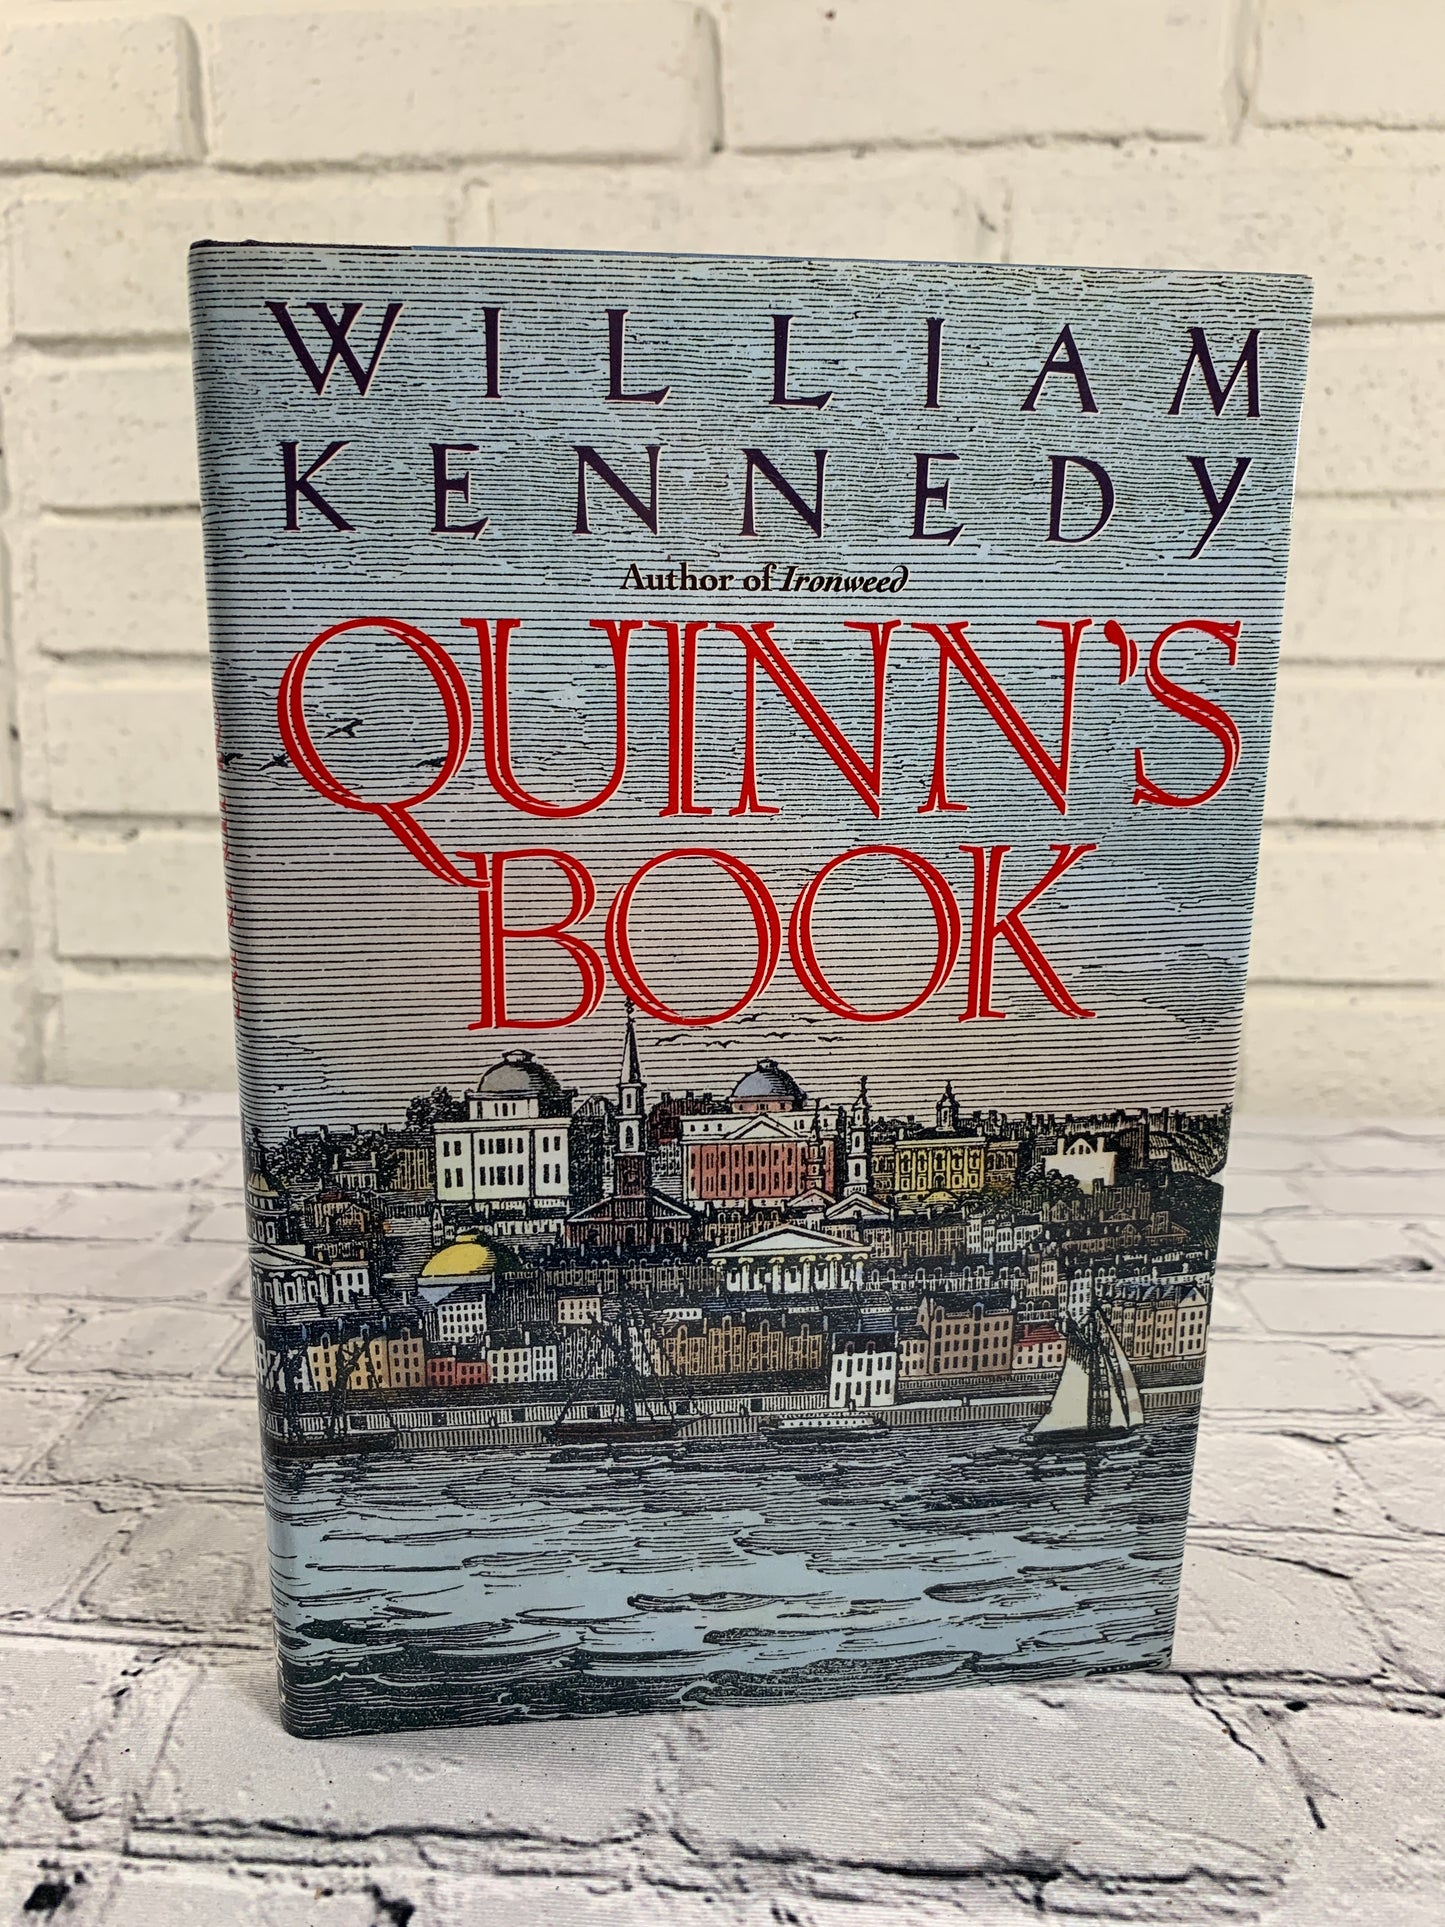 Quinn's Book by William Kennedy [1988]